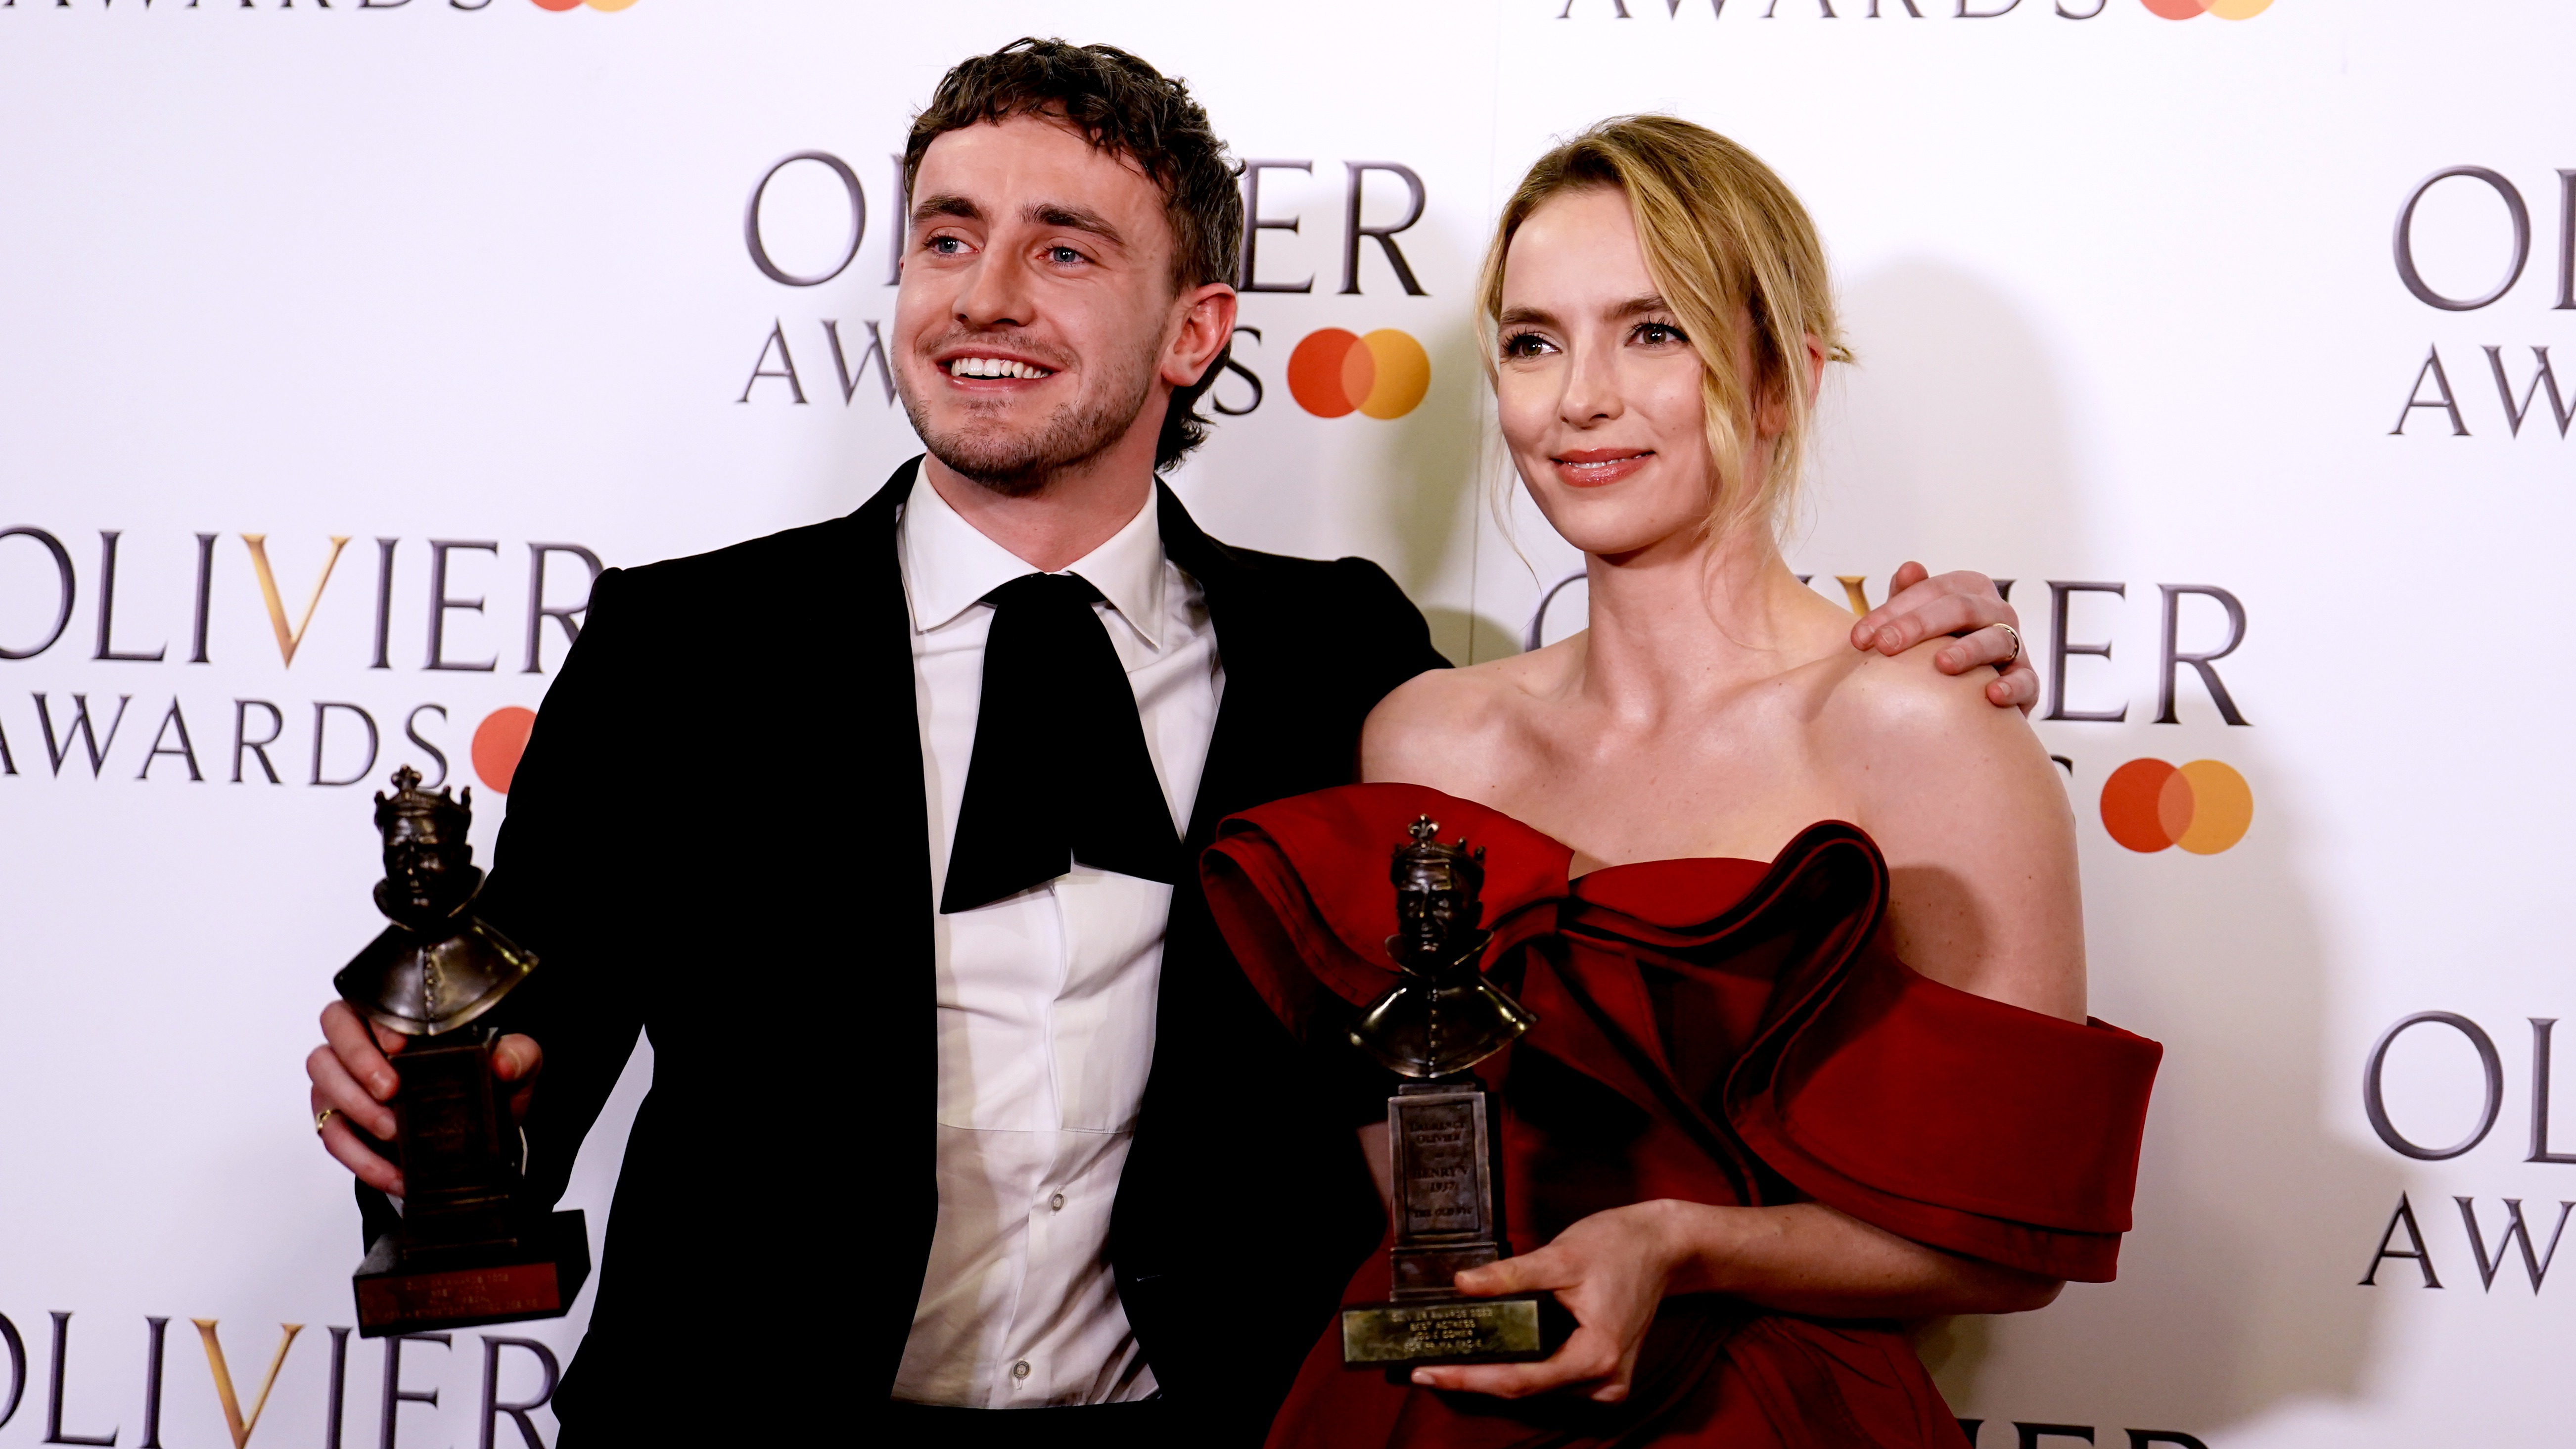 Olivier Awards 2023 winners Jodie Comer and Paul Mescal take home top